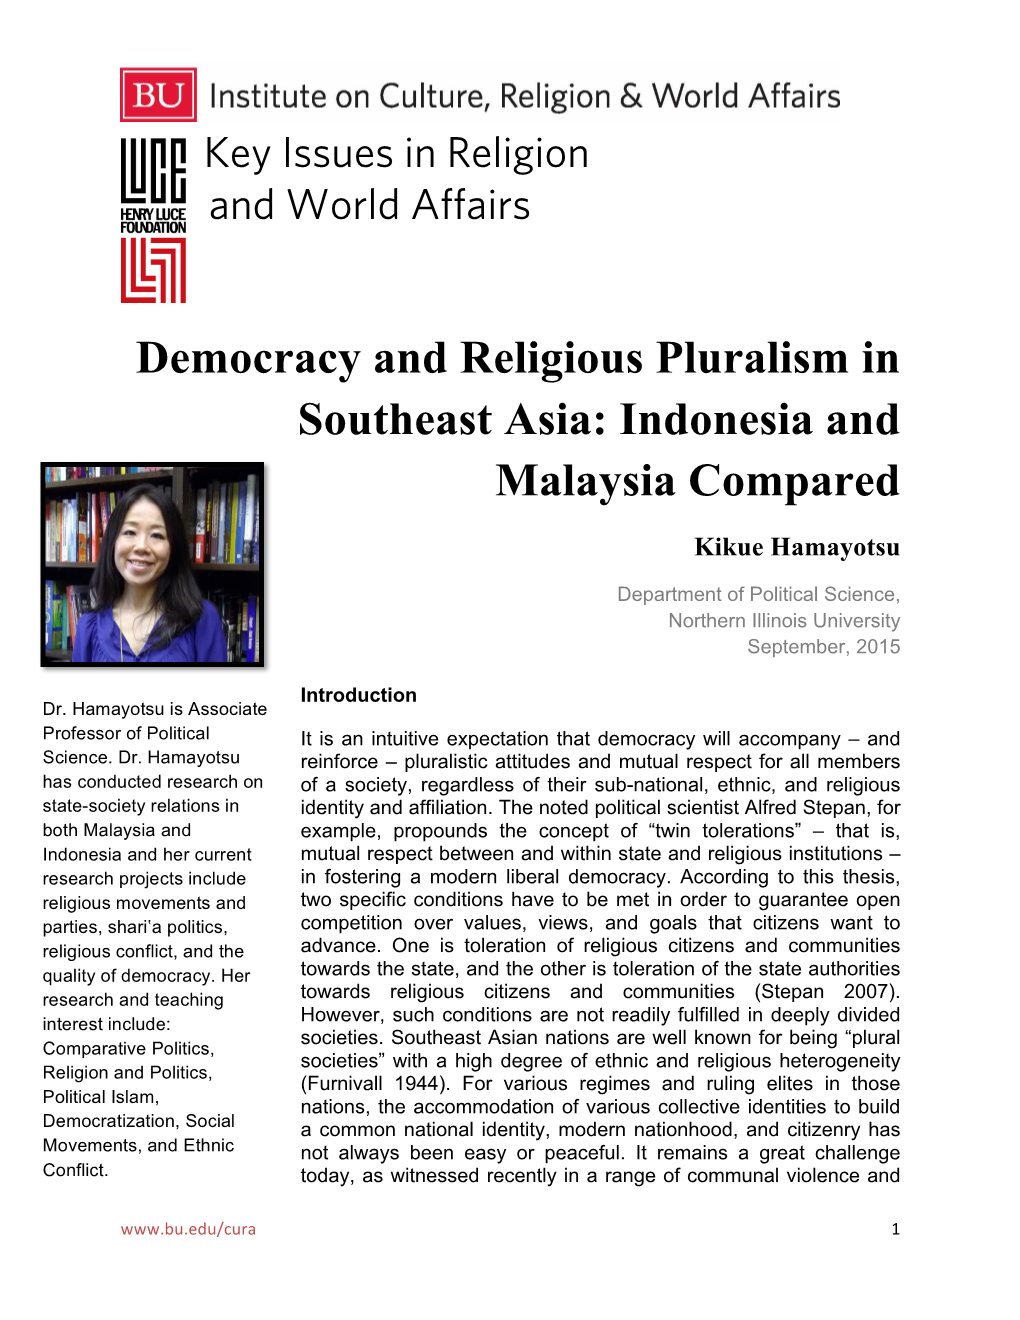 Democracy and Religious Pluralism in Southeast Asia: Indonesia and Malaysia Compared